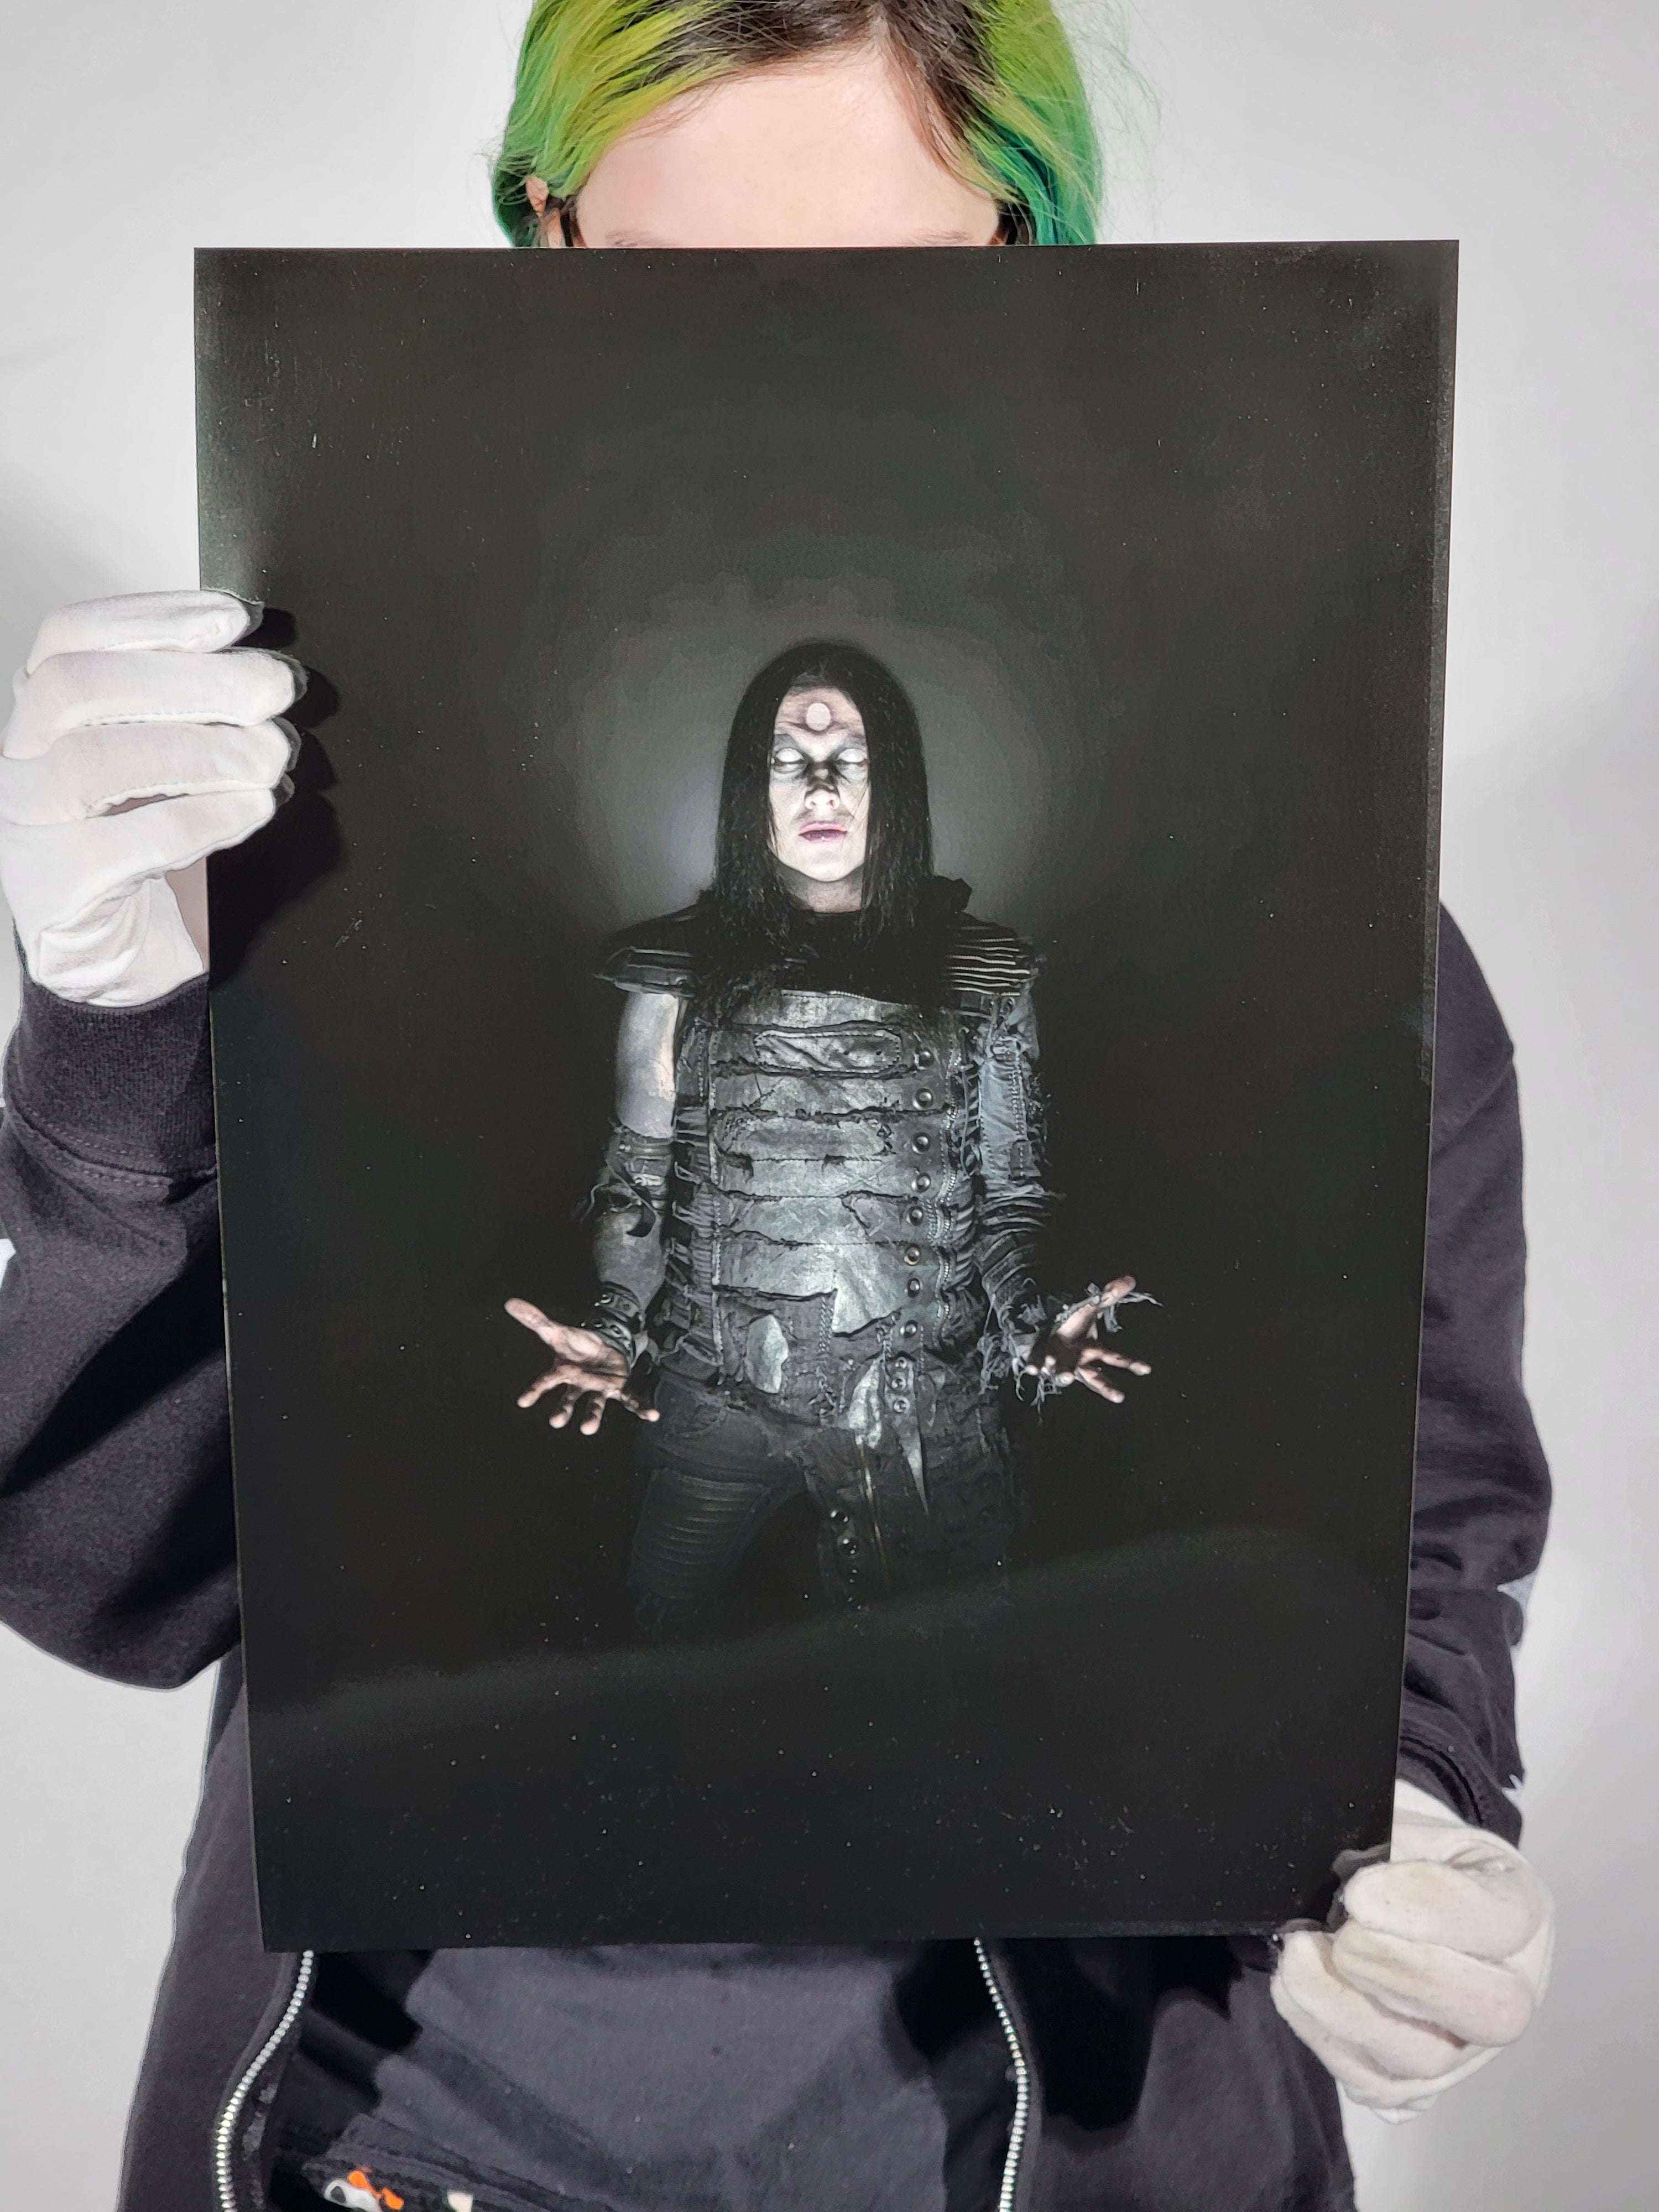 Gallery Print: Wednesday 13 12x18 metallic gallery print (only one available)